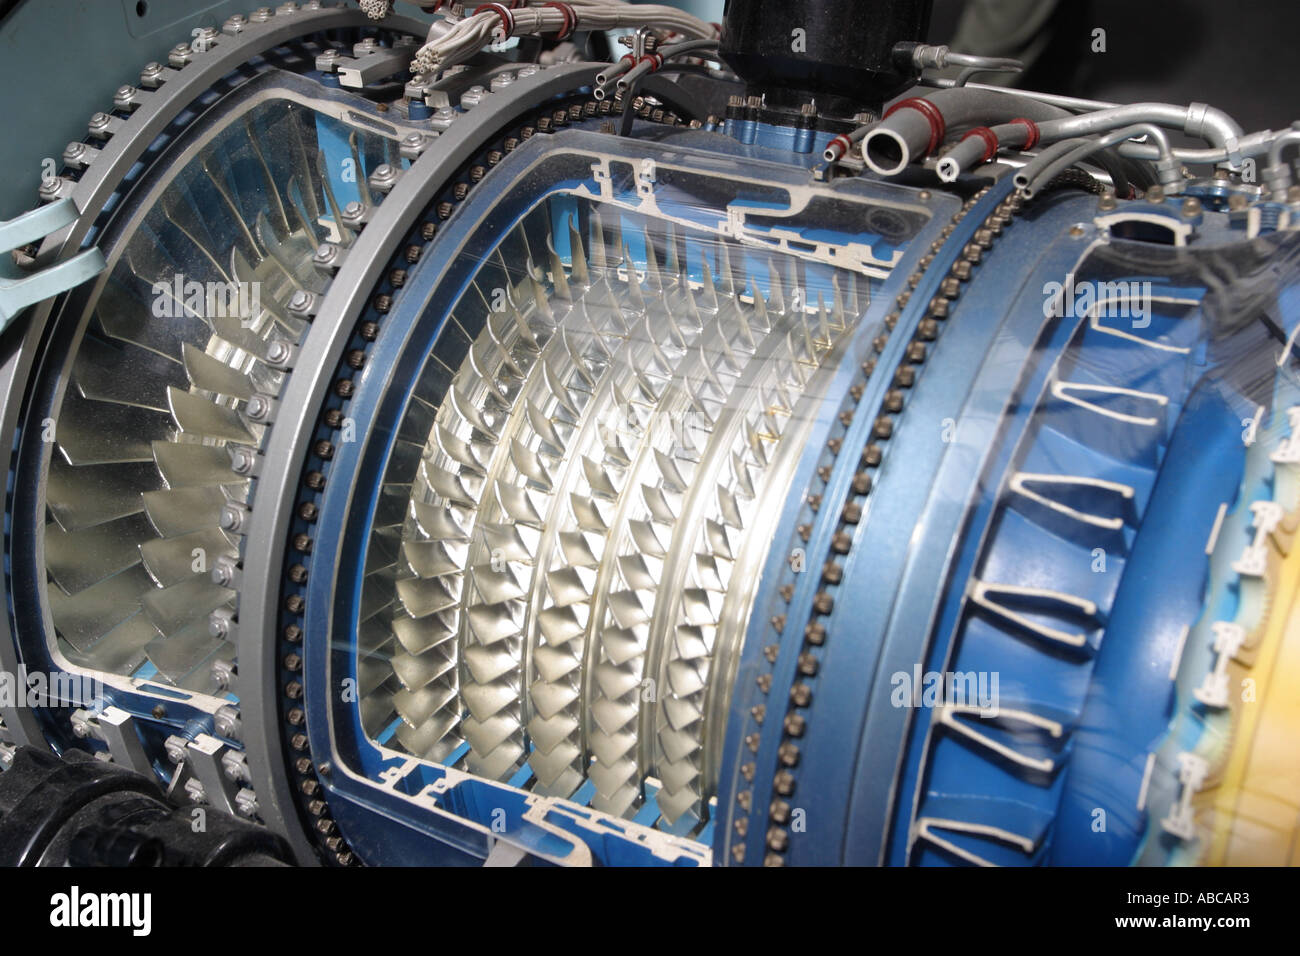 Model of jet engine cutaway showing blades and turbine inner workings Stock Photo